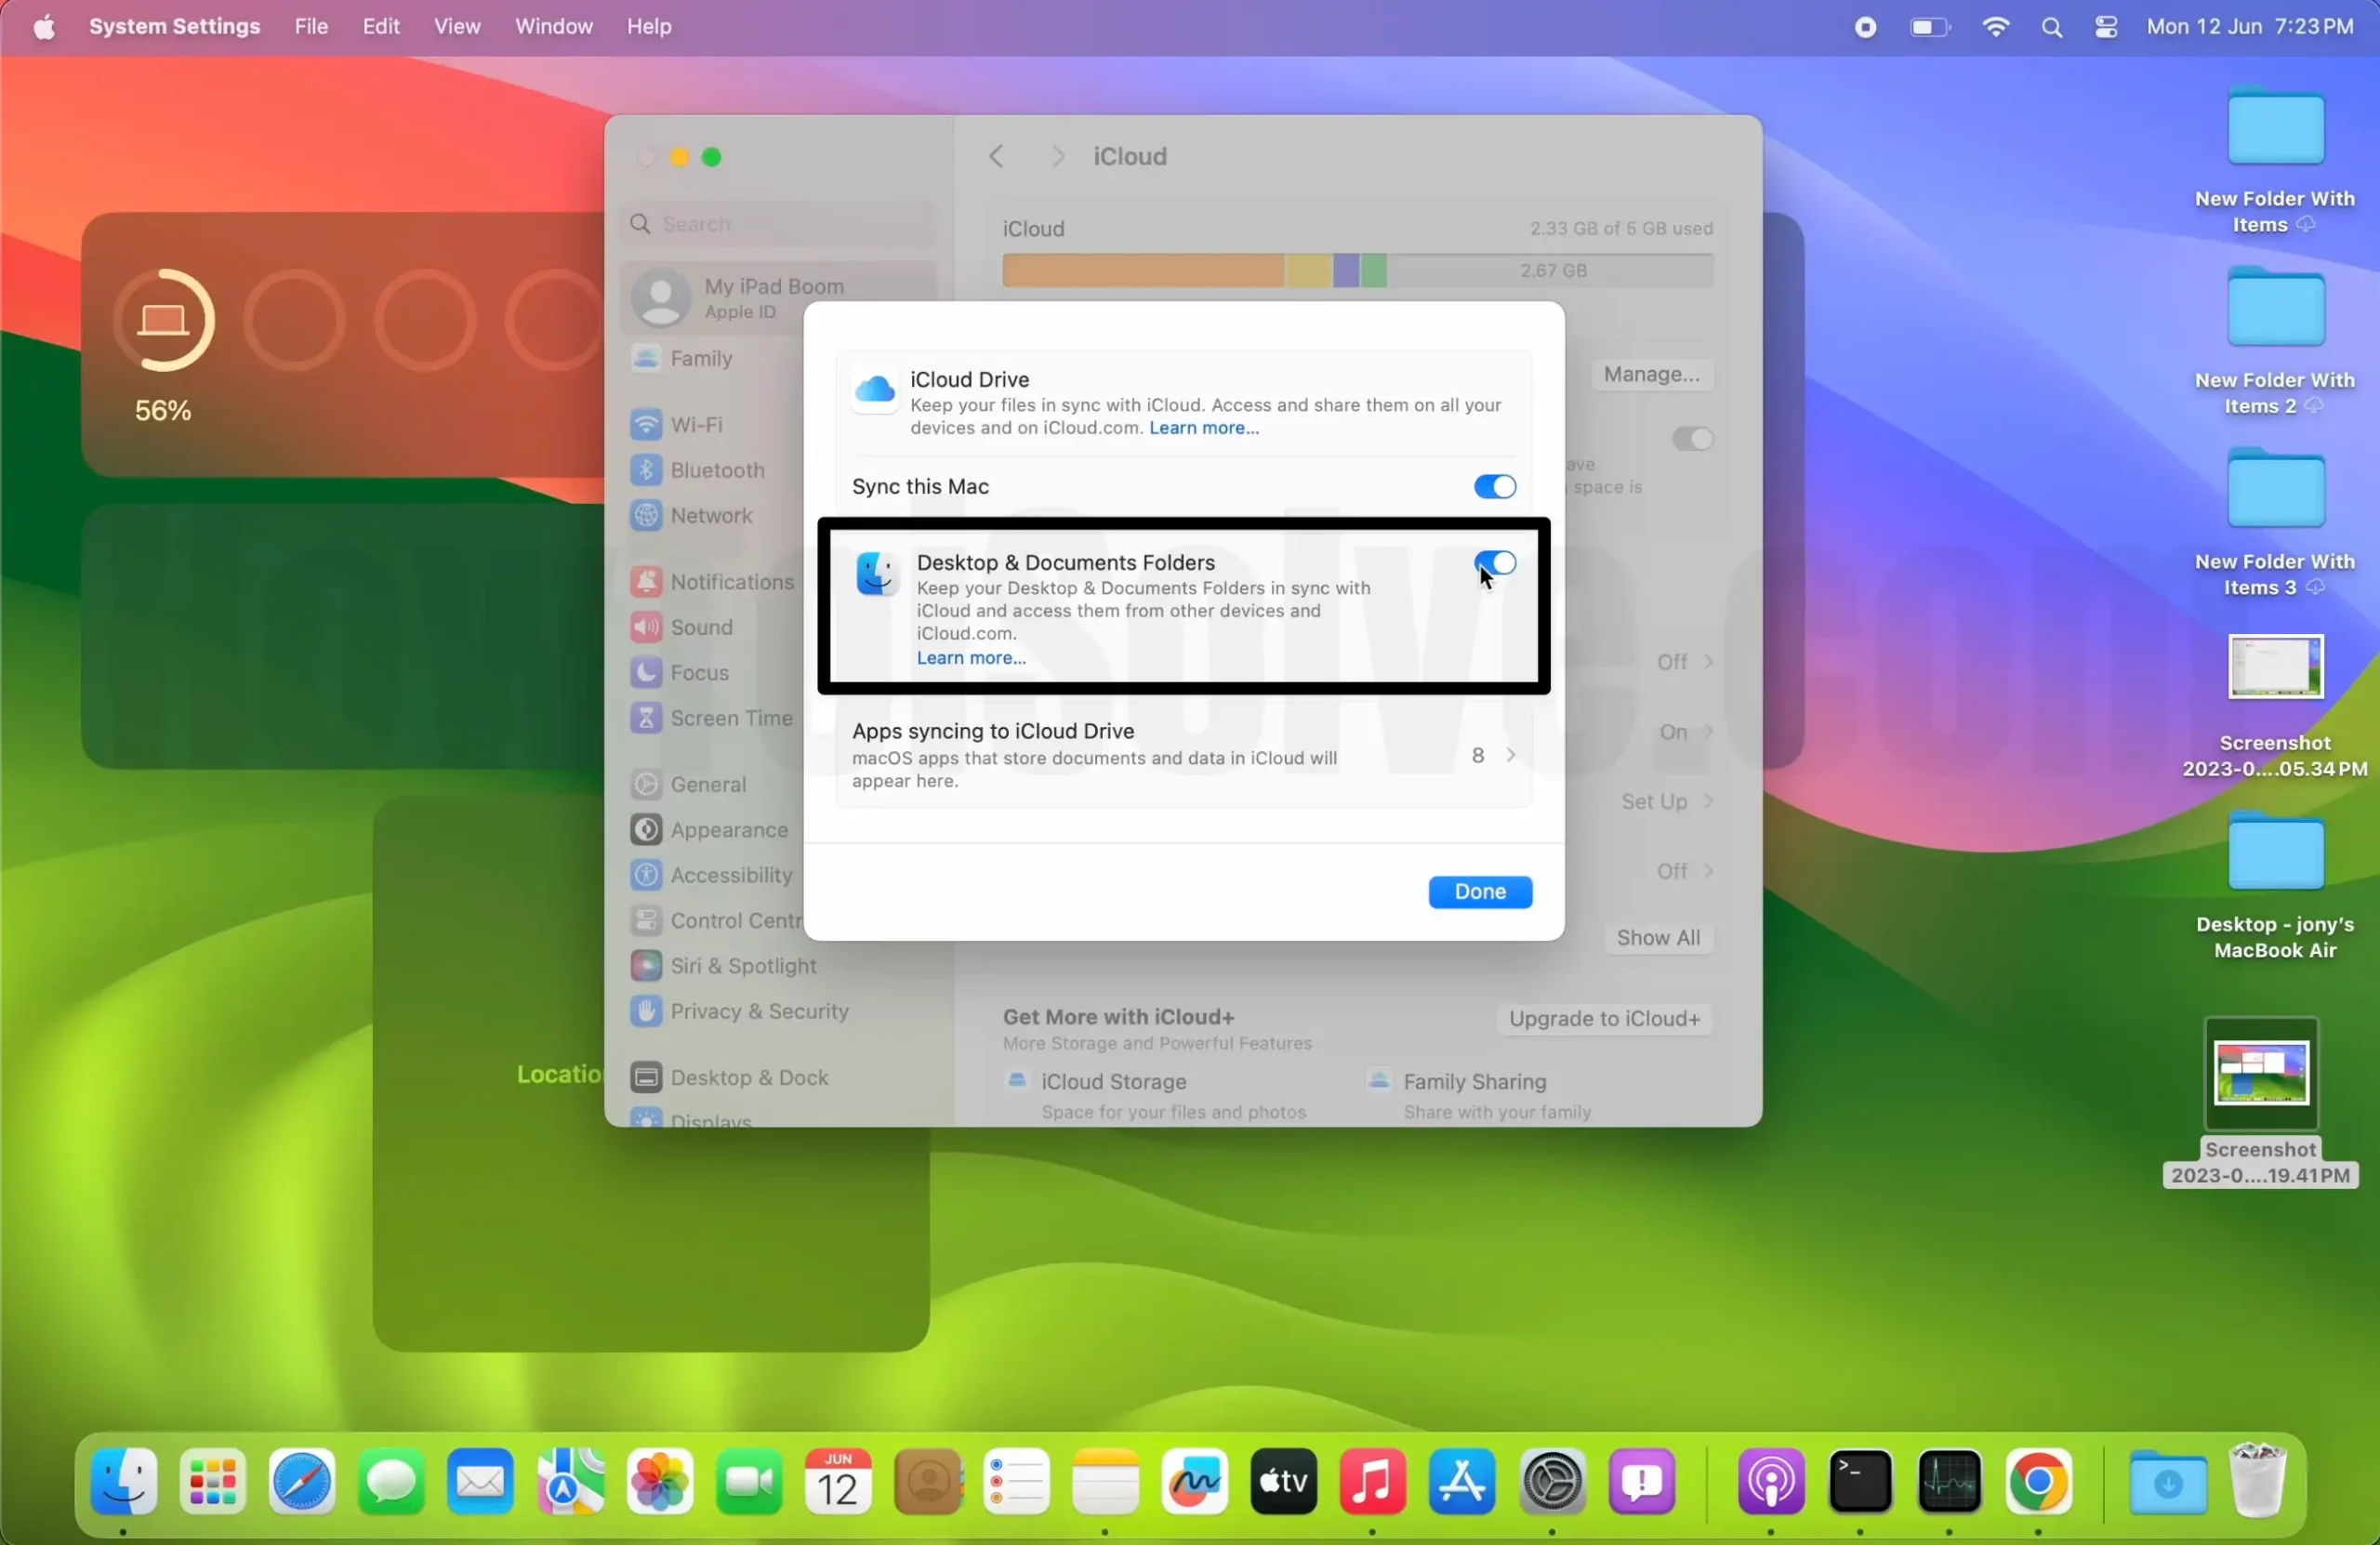 Turn off Desktop and Documents folder for iCloud sync in Mac